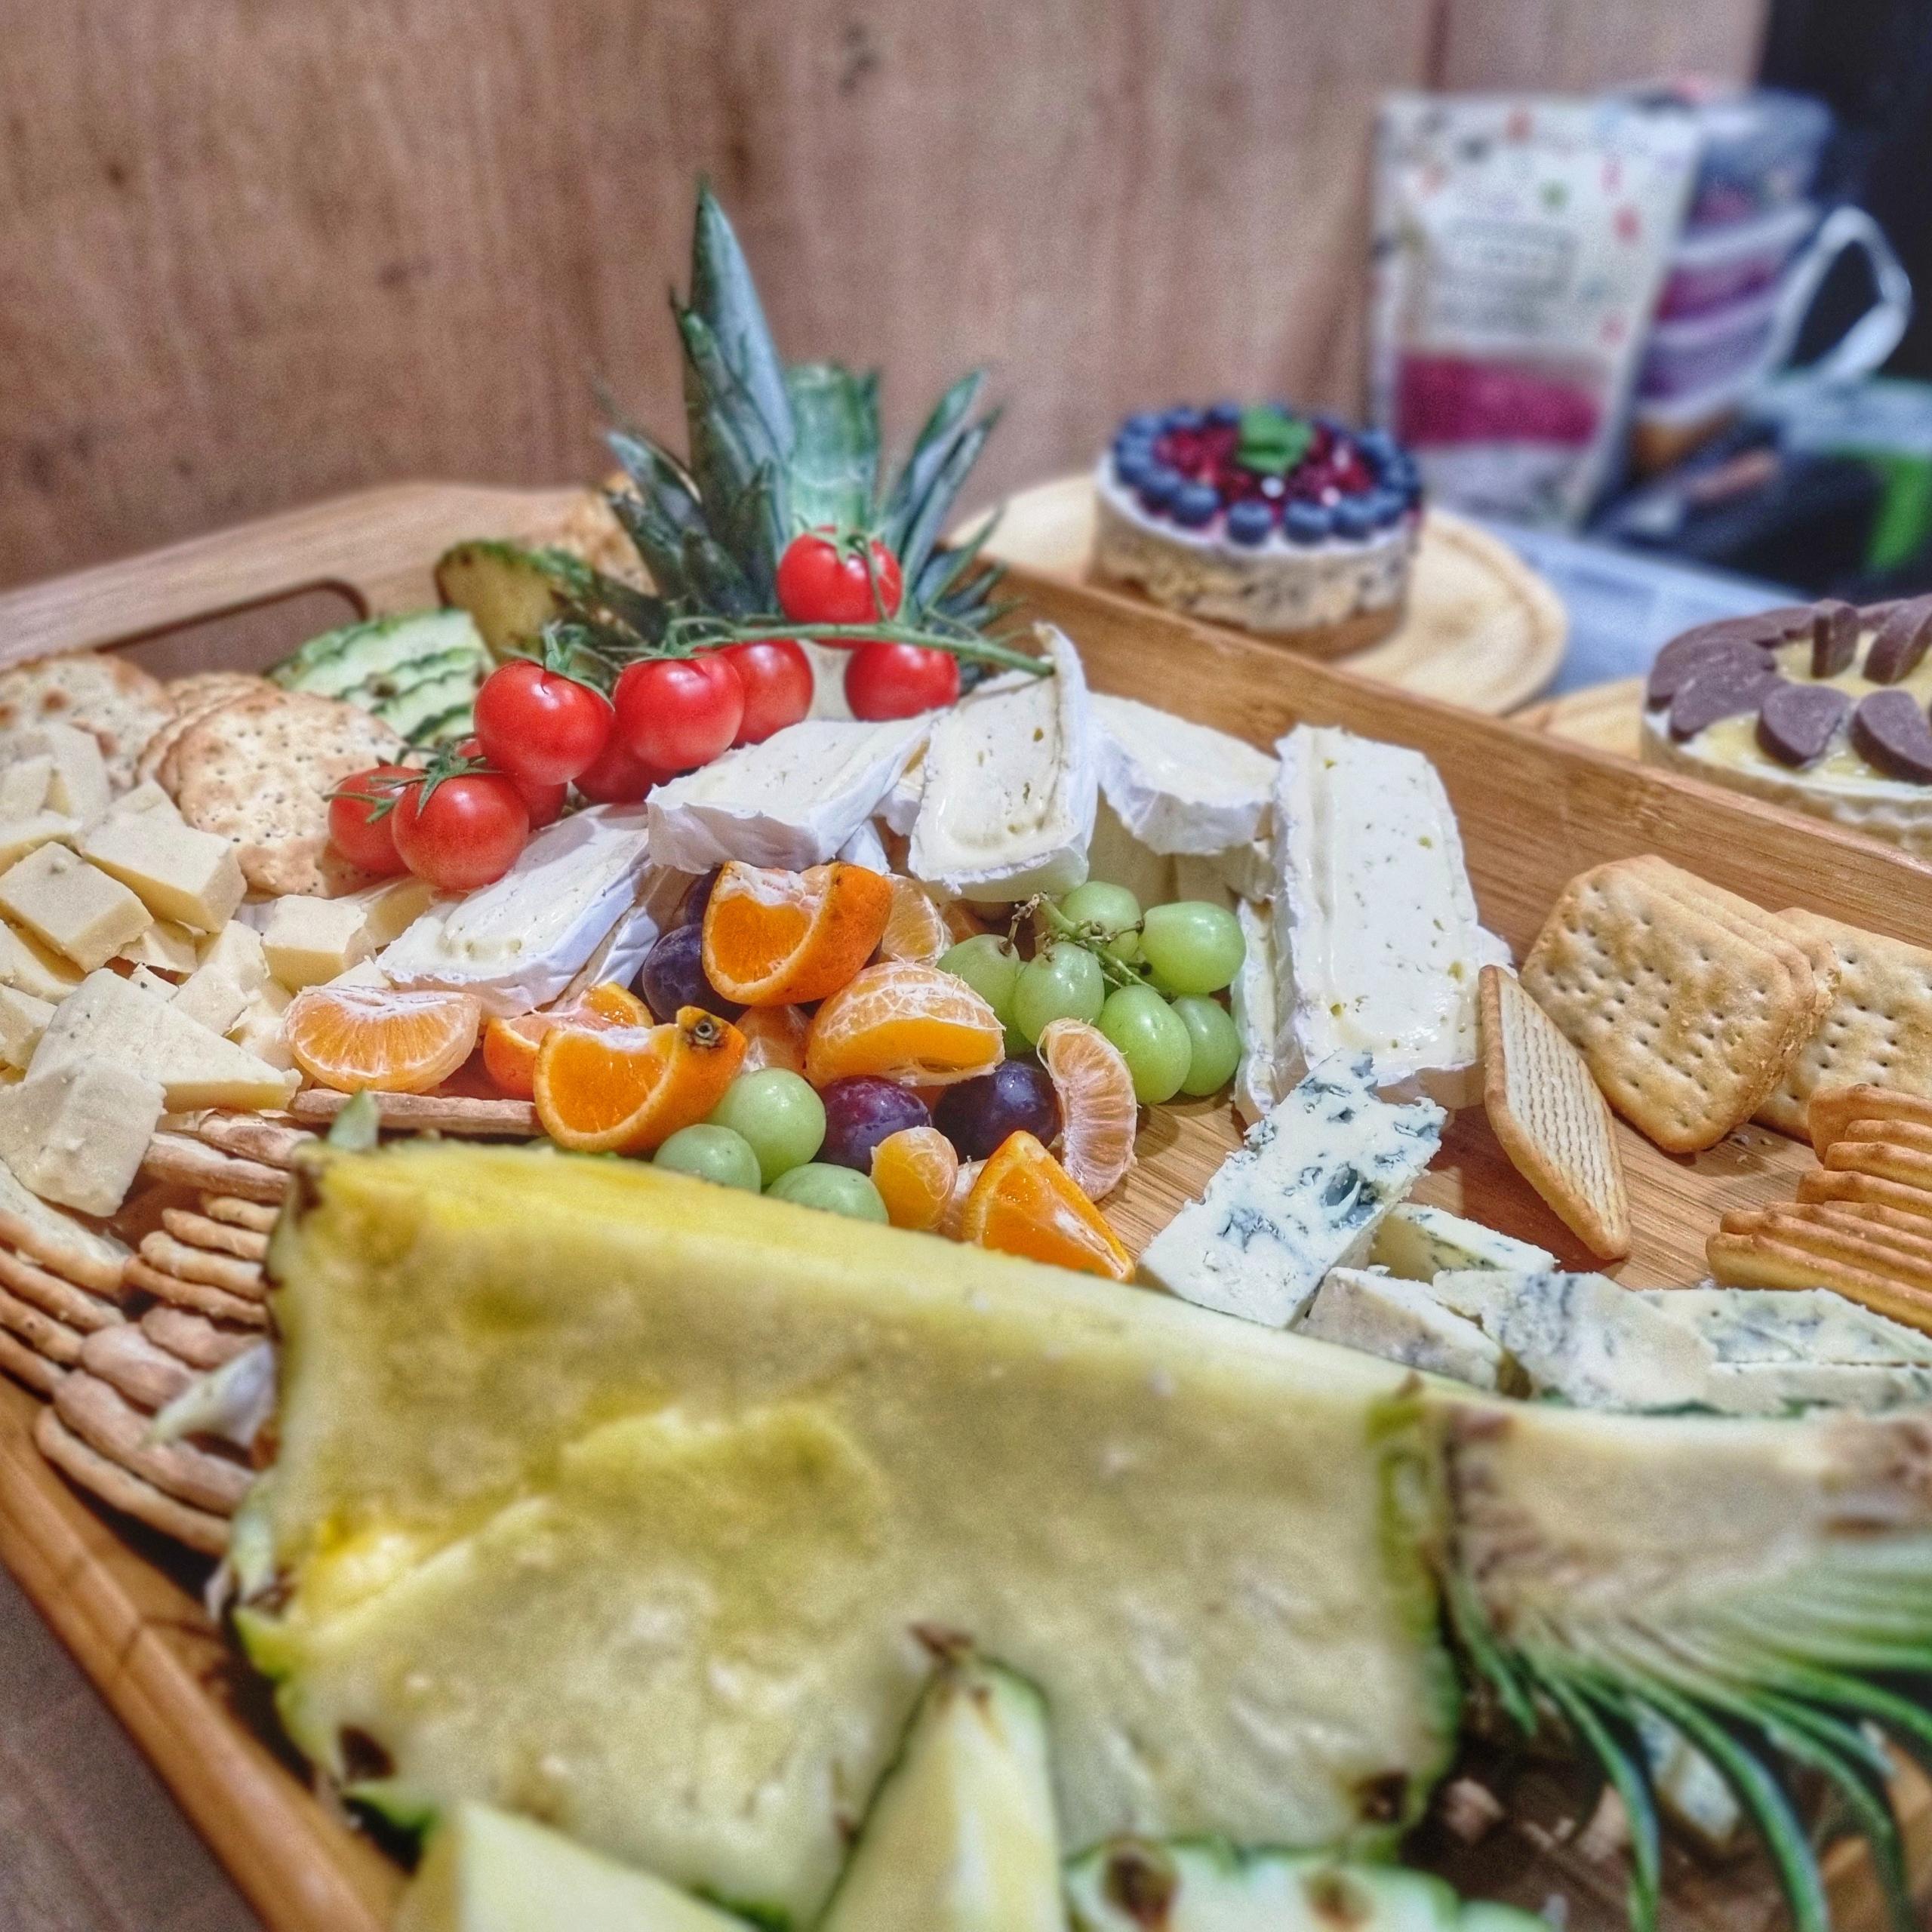 These trays make the best charcuterie boards